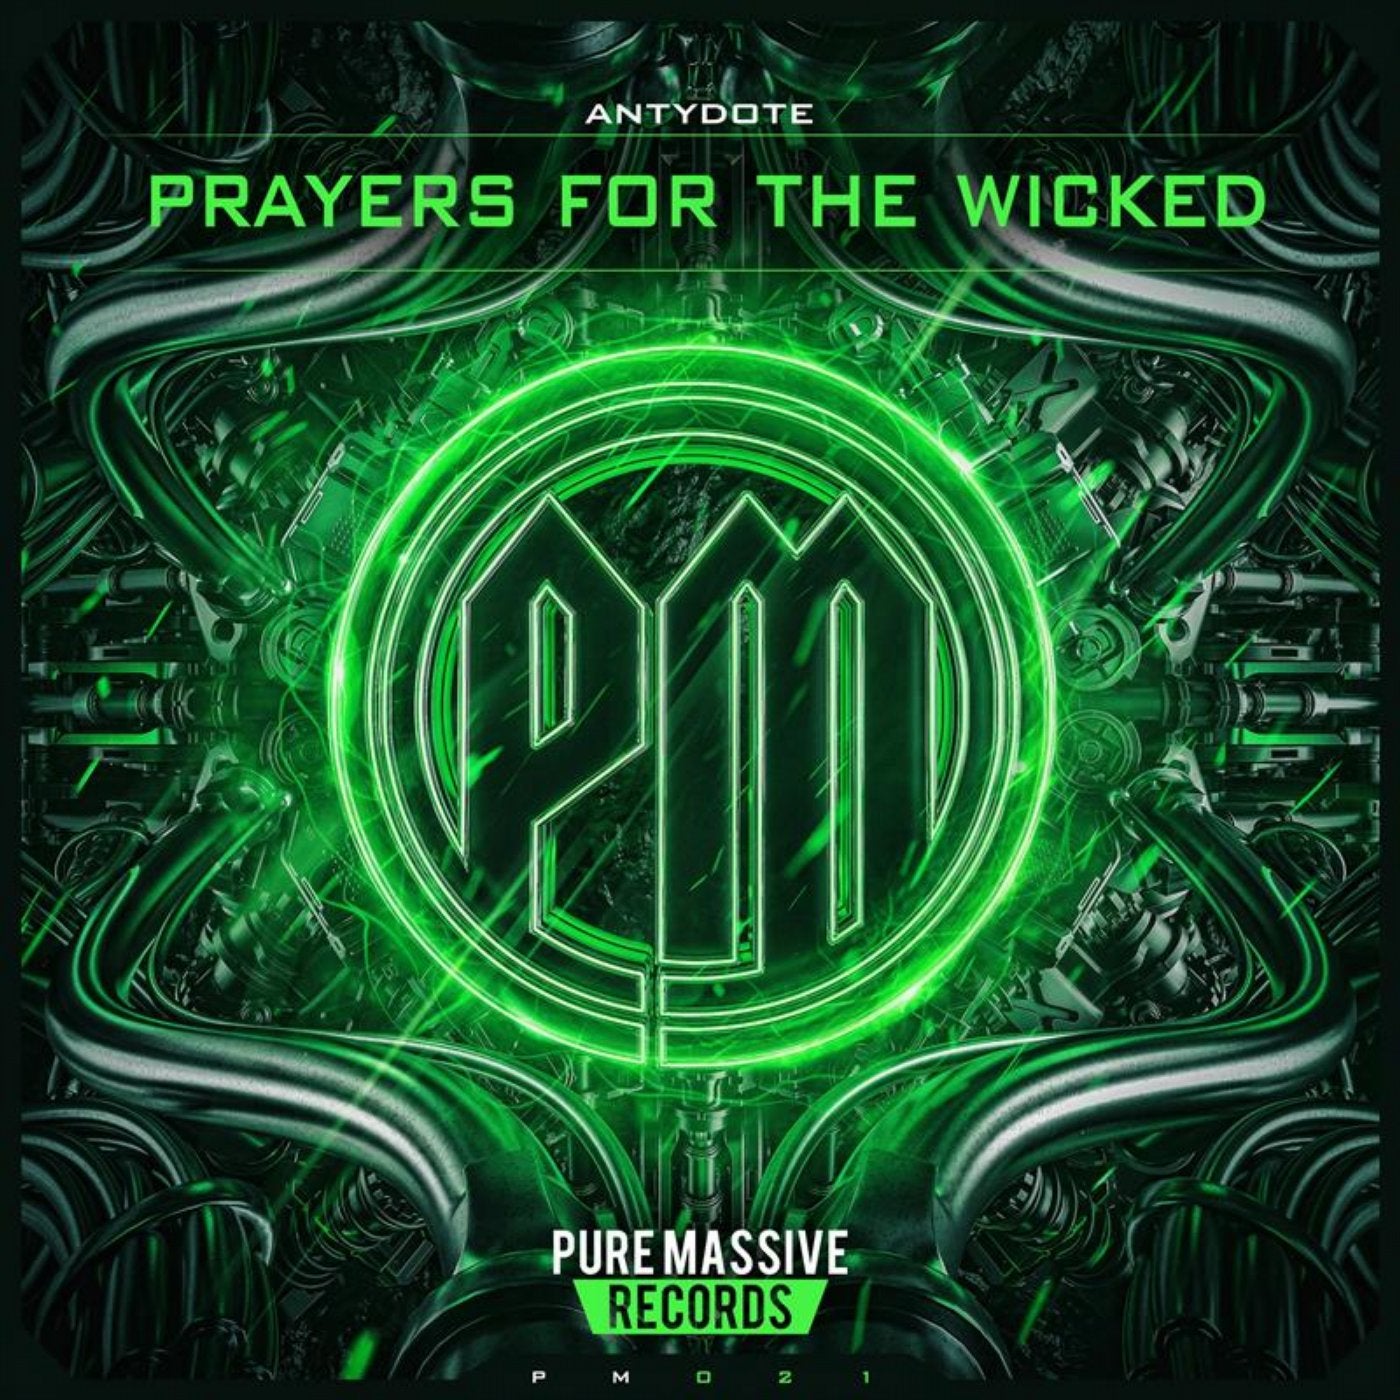 Prayers for the Wicked